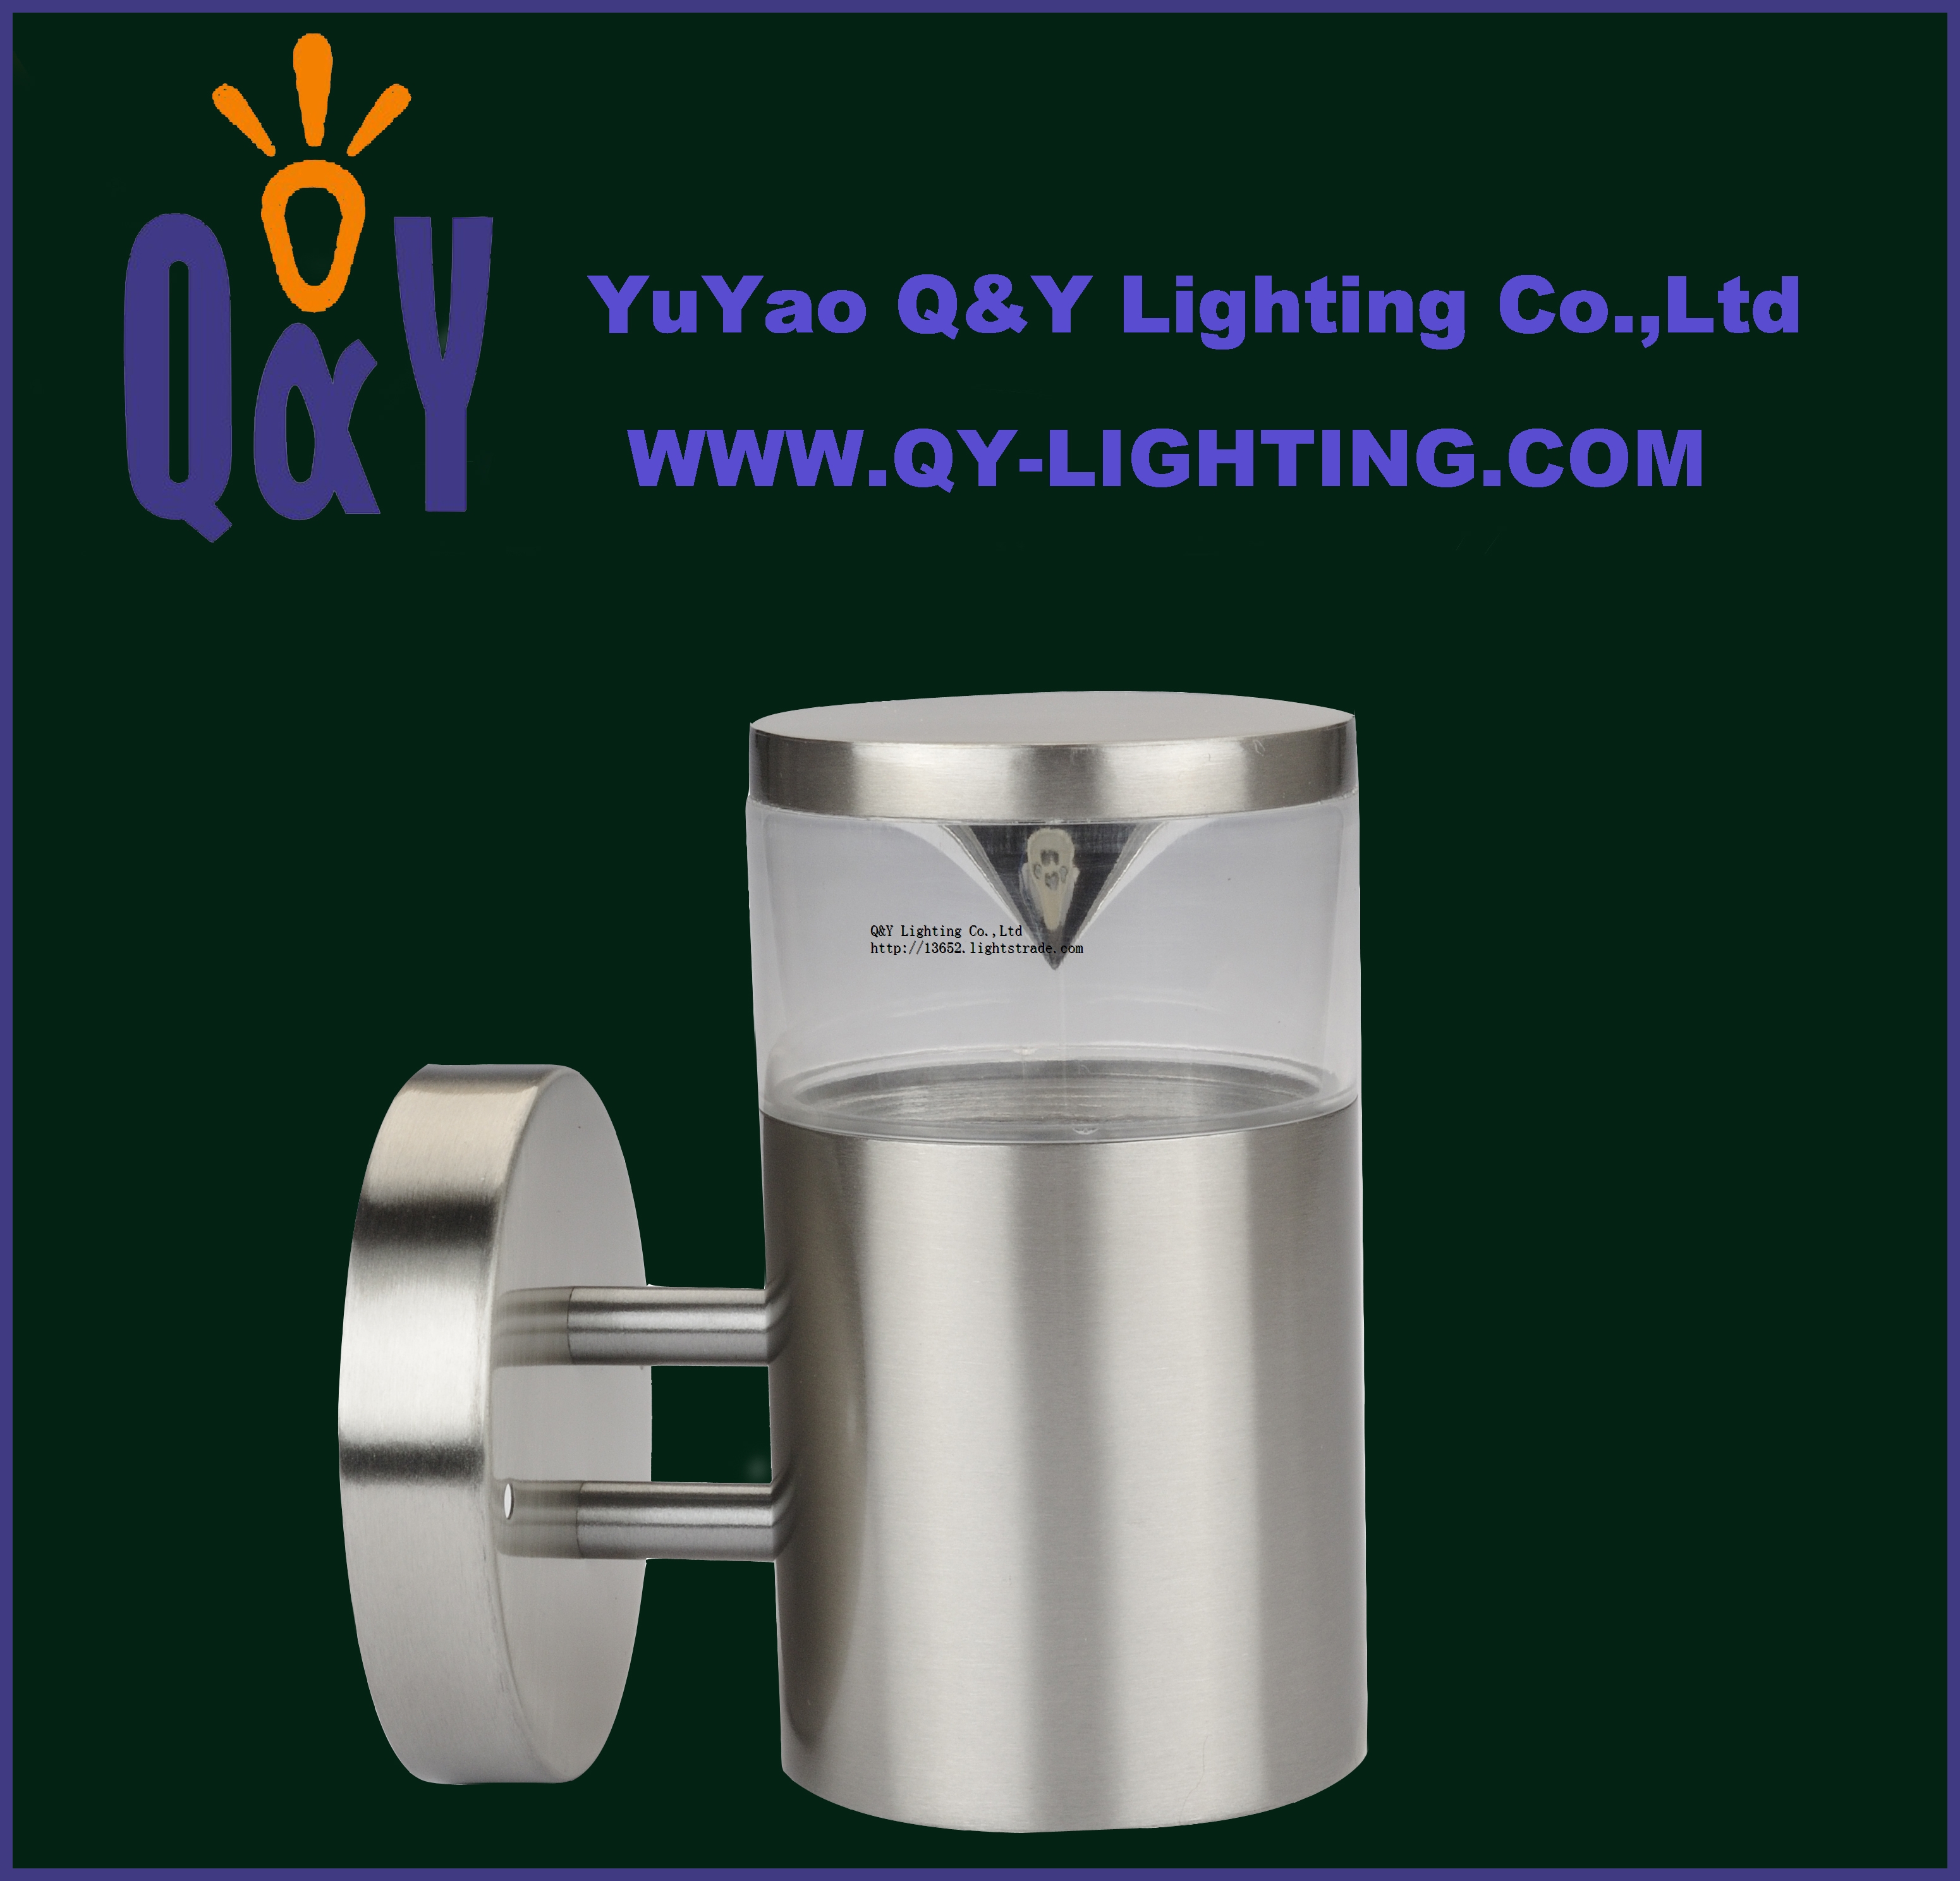 LED stainless steel outdoor and exterior luminaria light